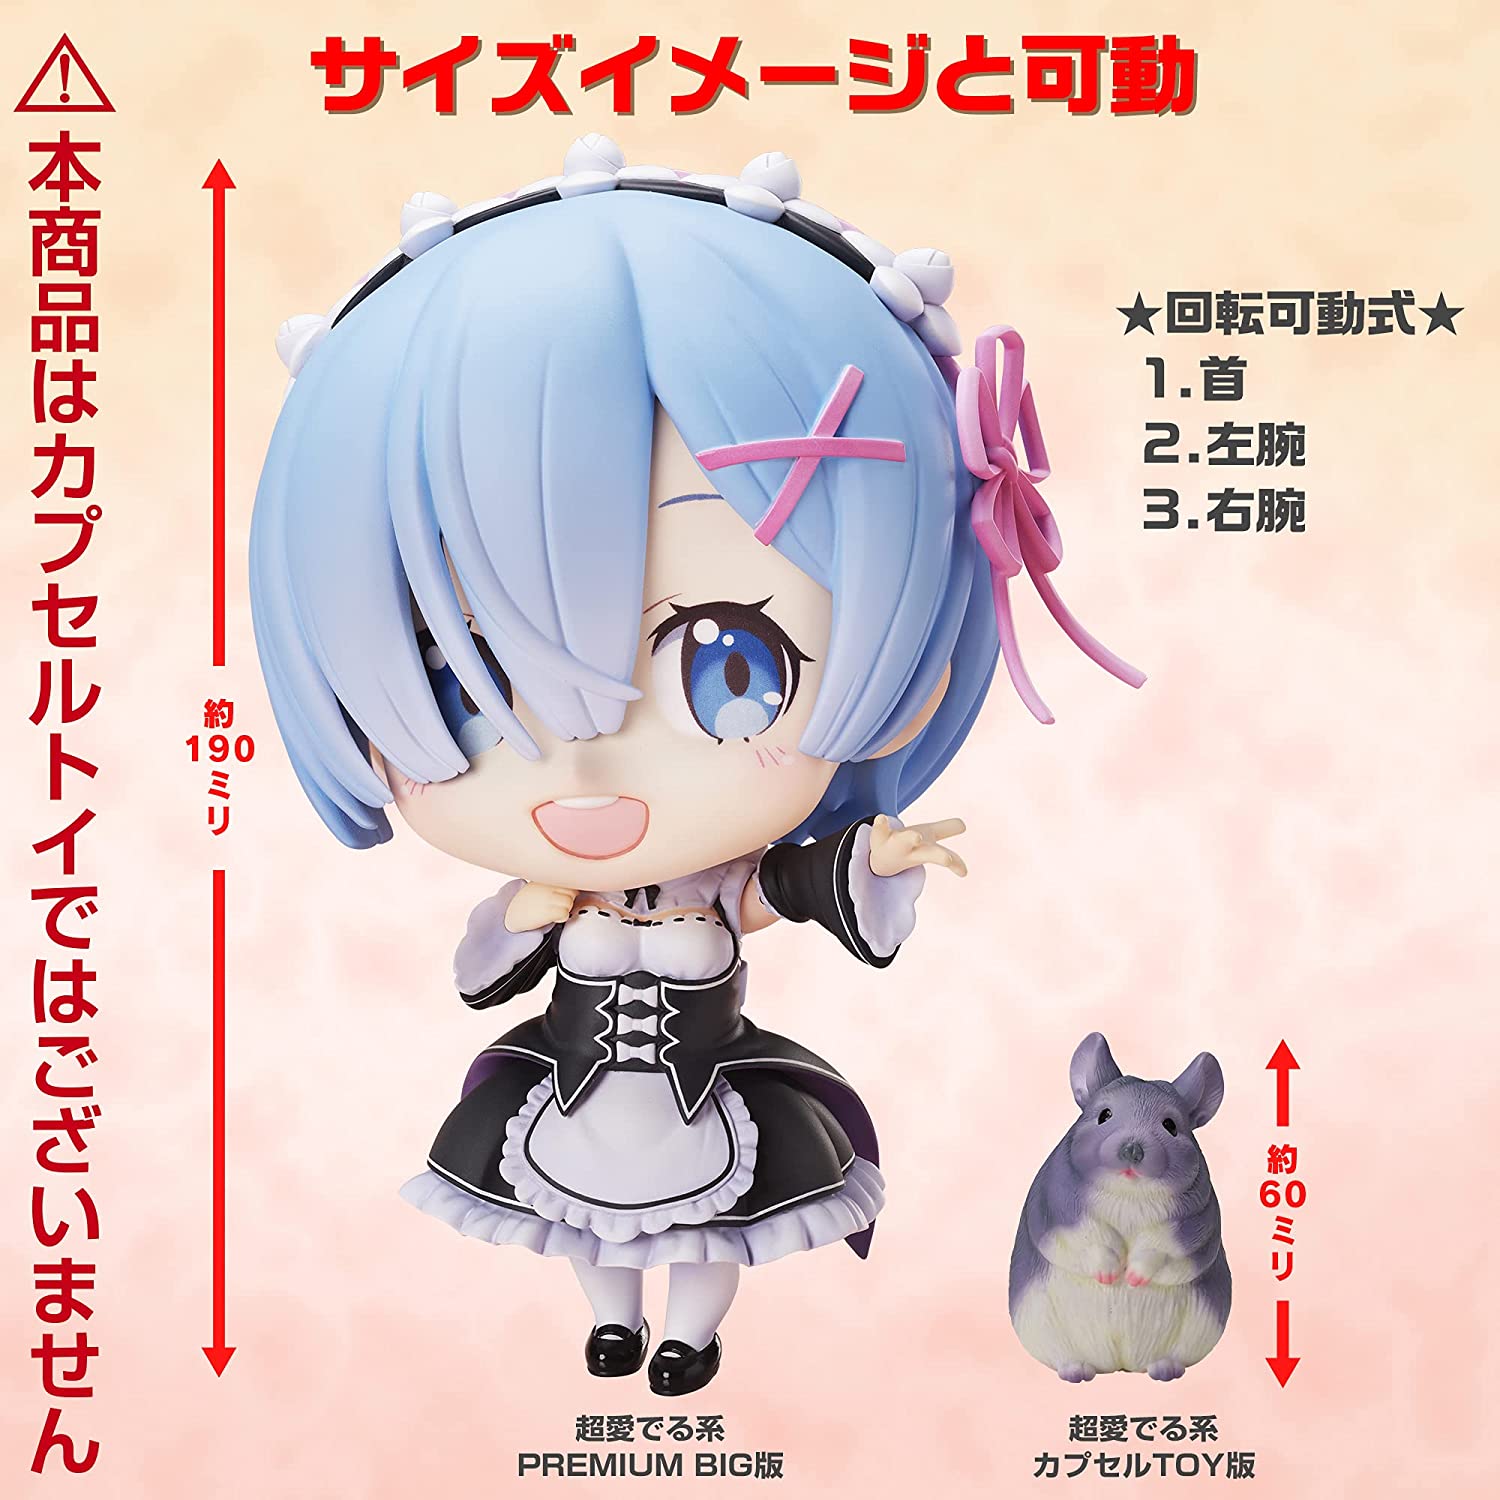 Cho Mederu-kei Deformed Chic Figure PREMIUM BIG Re:ZERO -Starting Life in Another World- Rem Coming Out to Meet You Ver. | animota